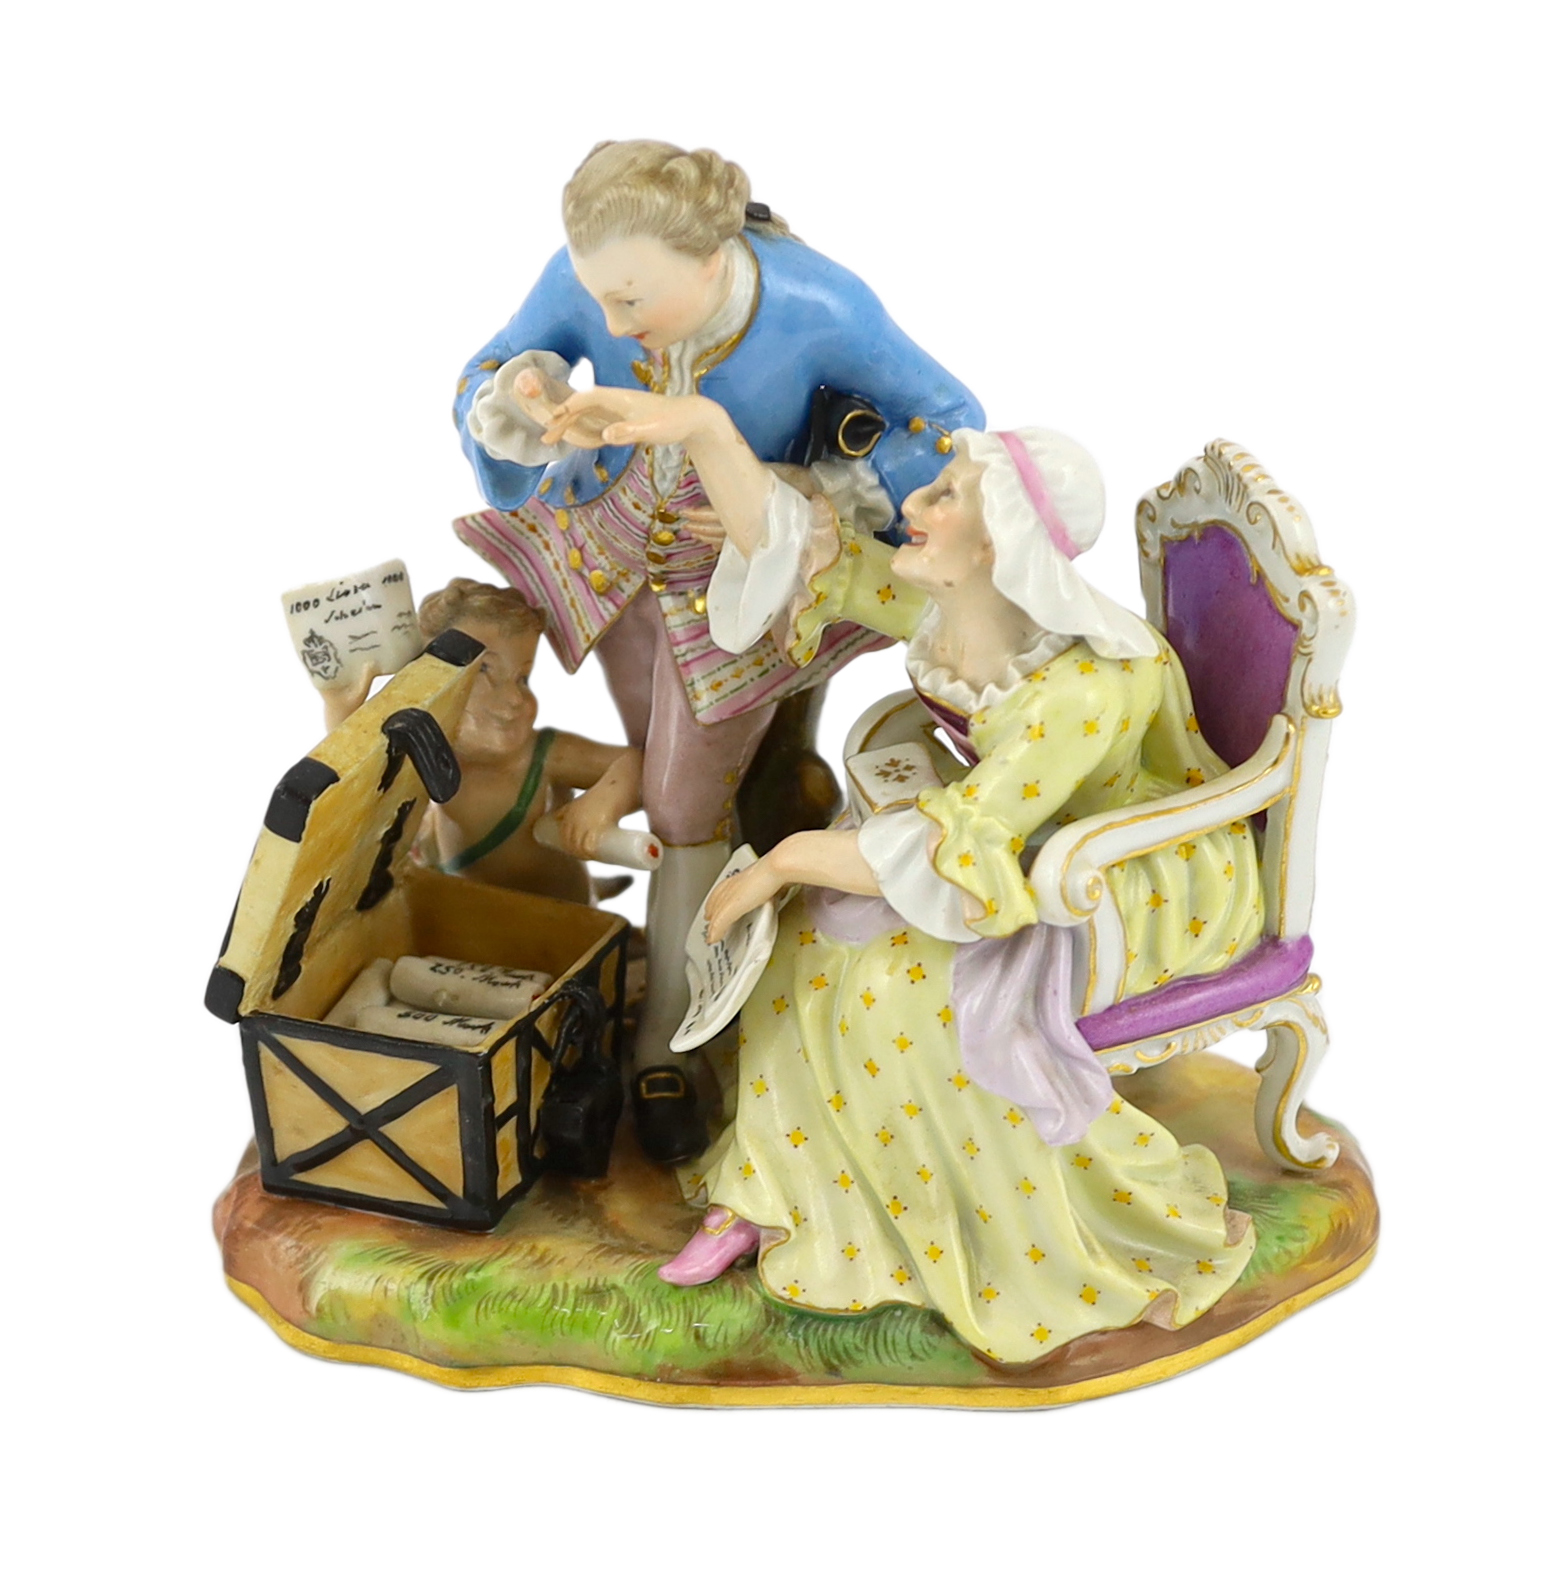 A Meissen group of an old woman and her young lover, 19th century, some restoration                                                                                                                                         